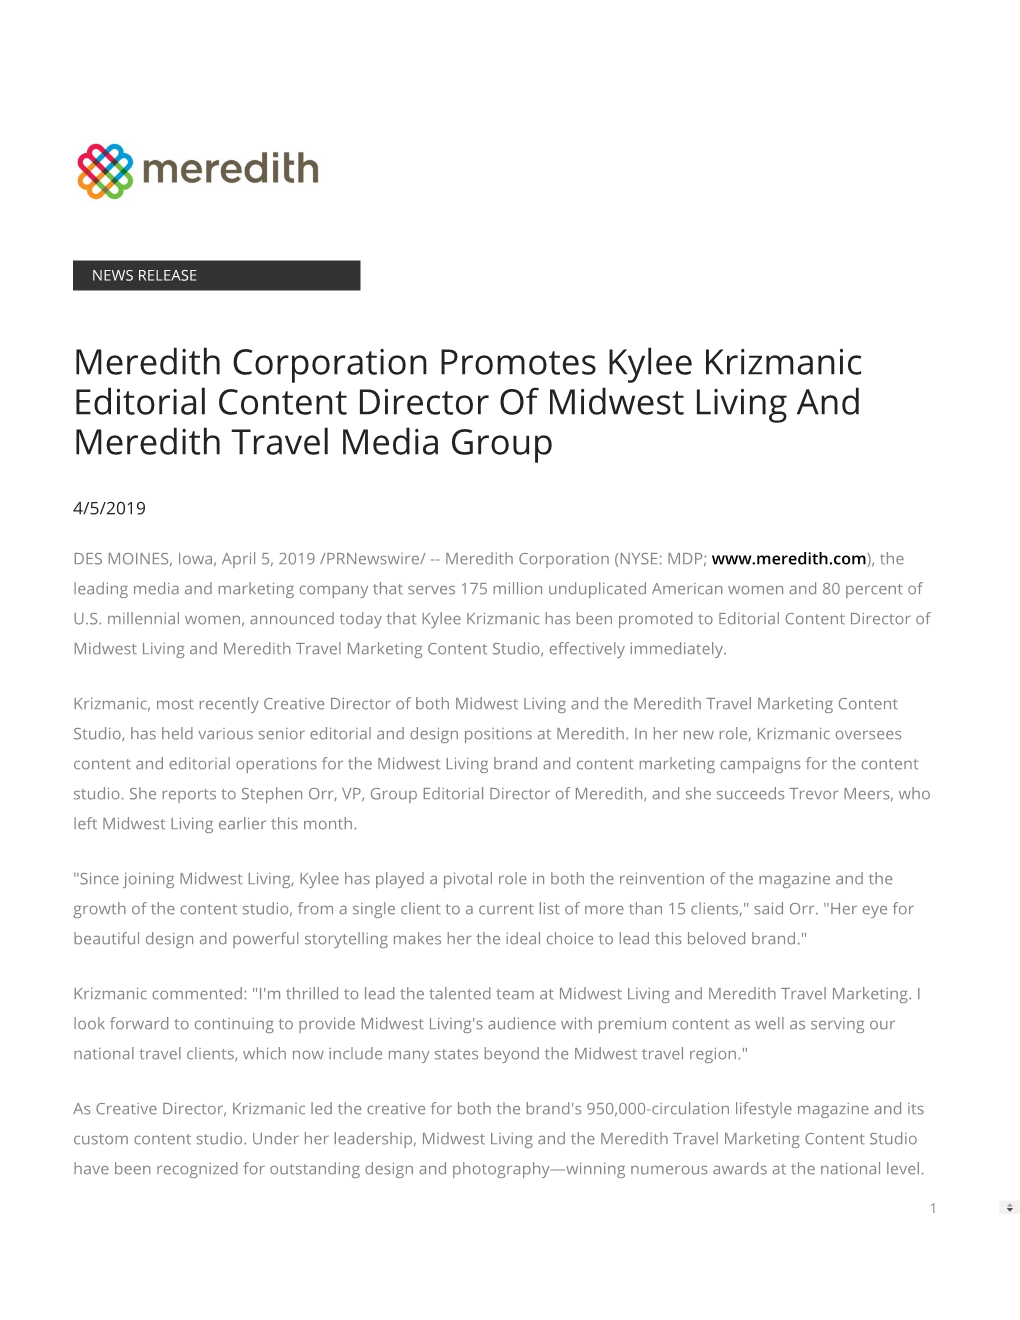 Meredith Corporation Promotes Kylee Krizmanic Editorial Content Director of Midwest Living and Meredith Travel Media Group